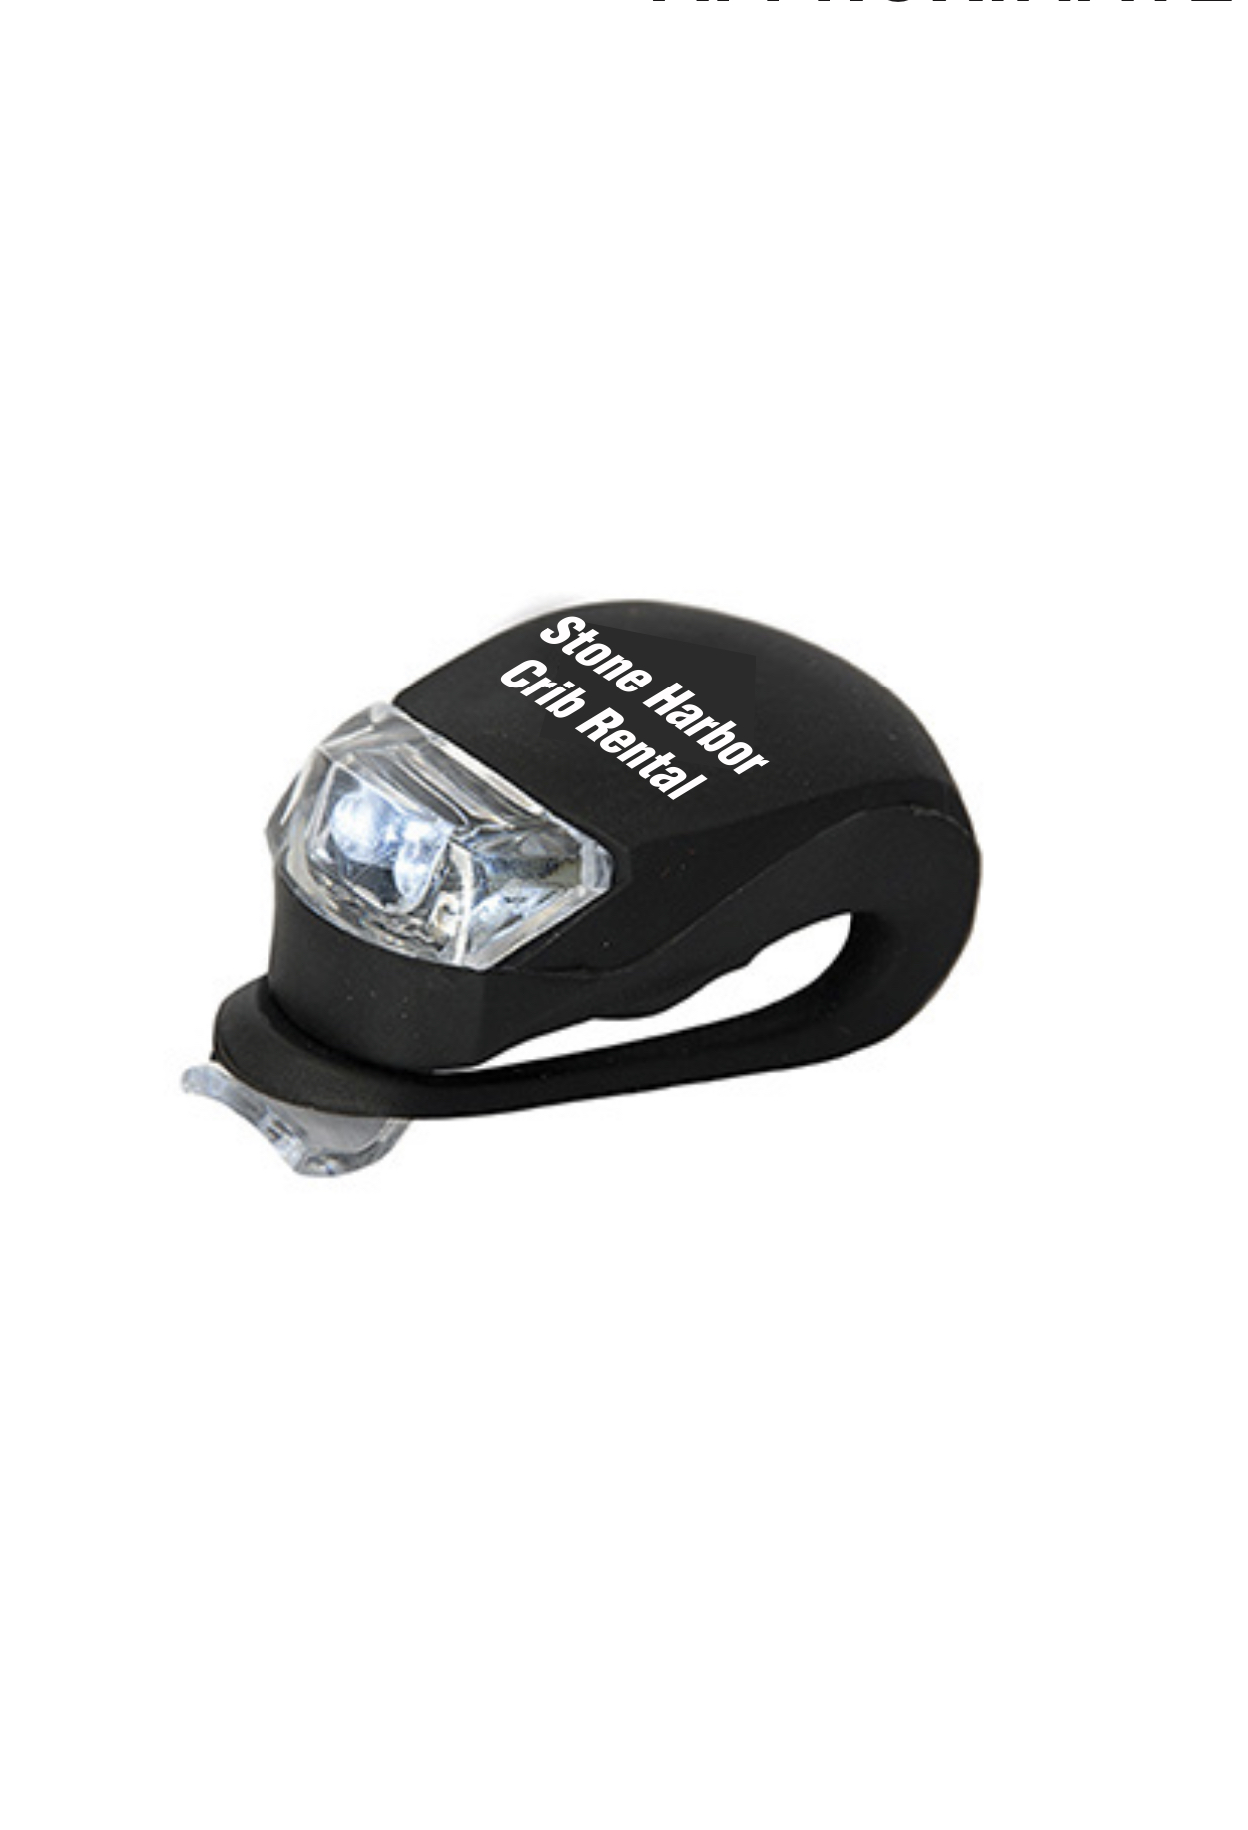 Bicycle Safety light